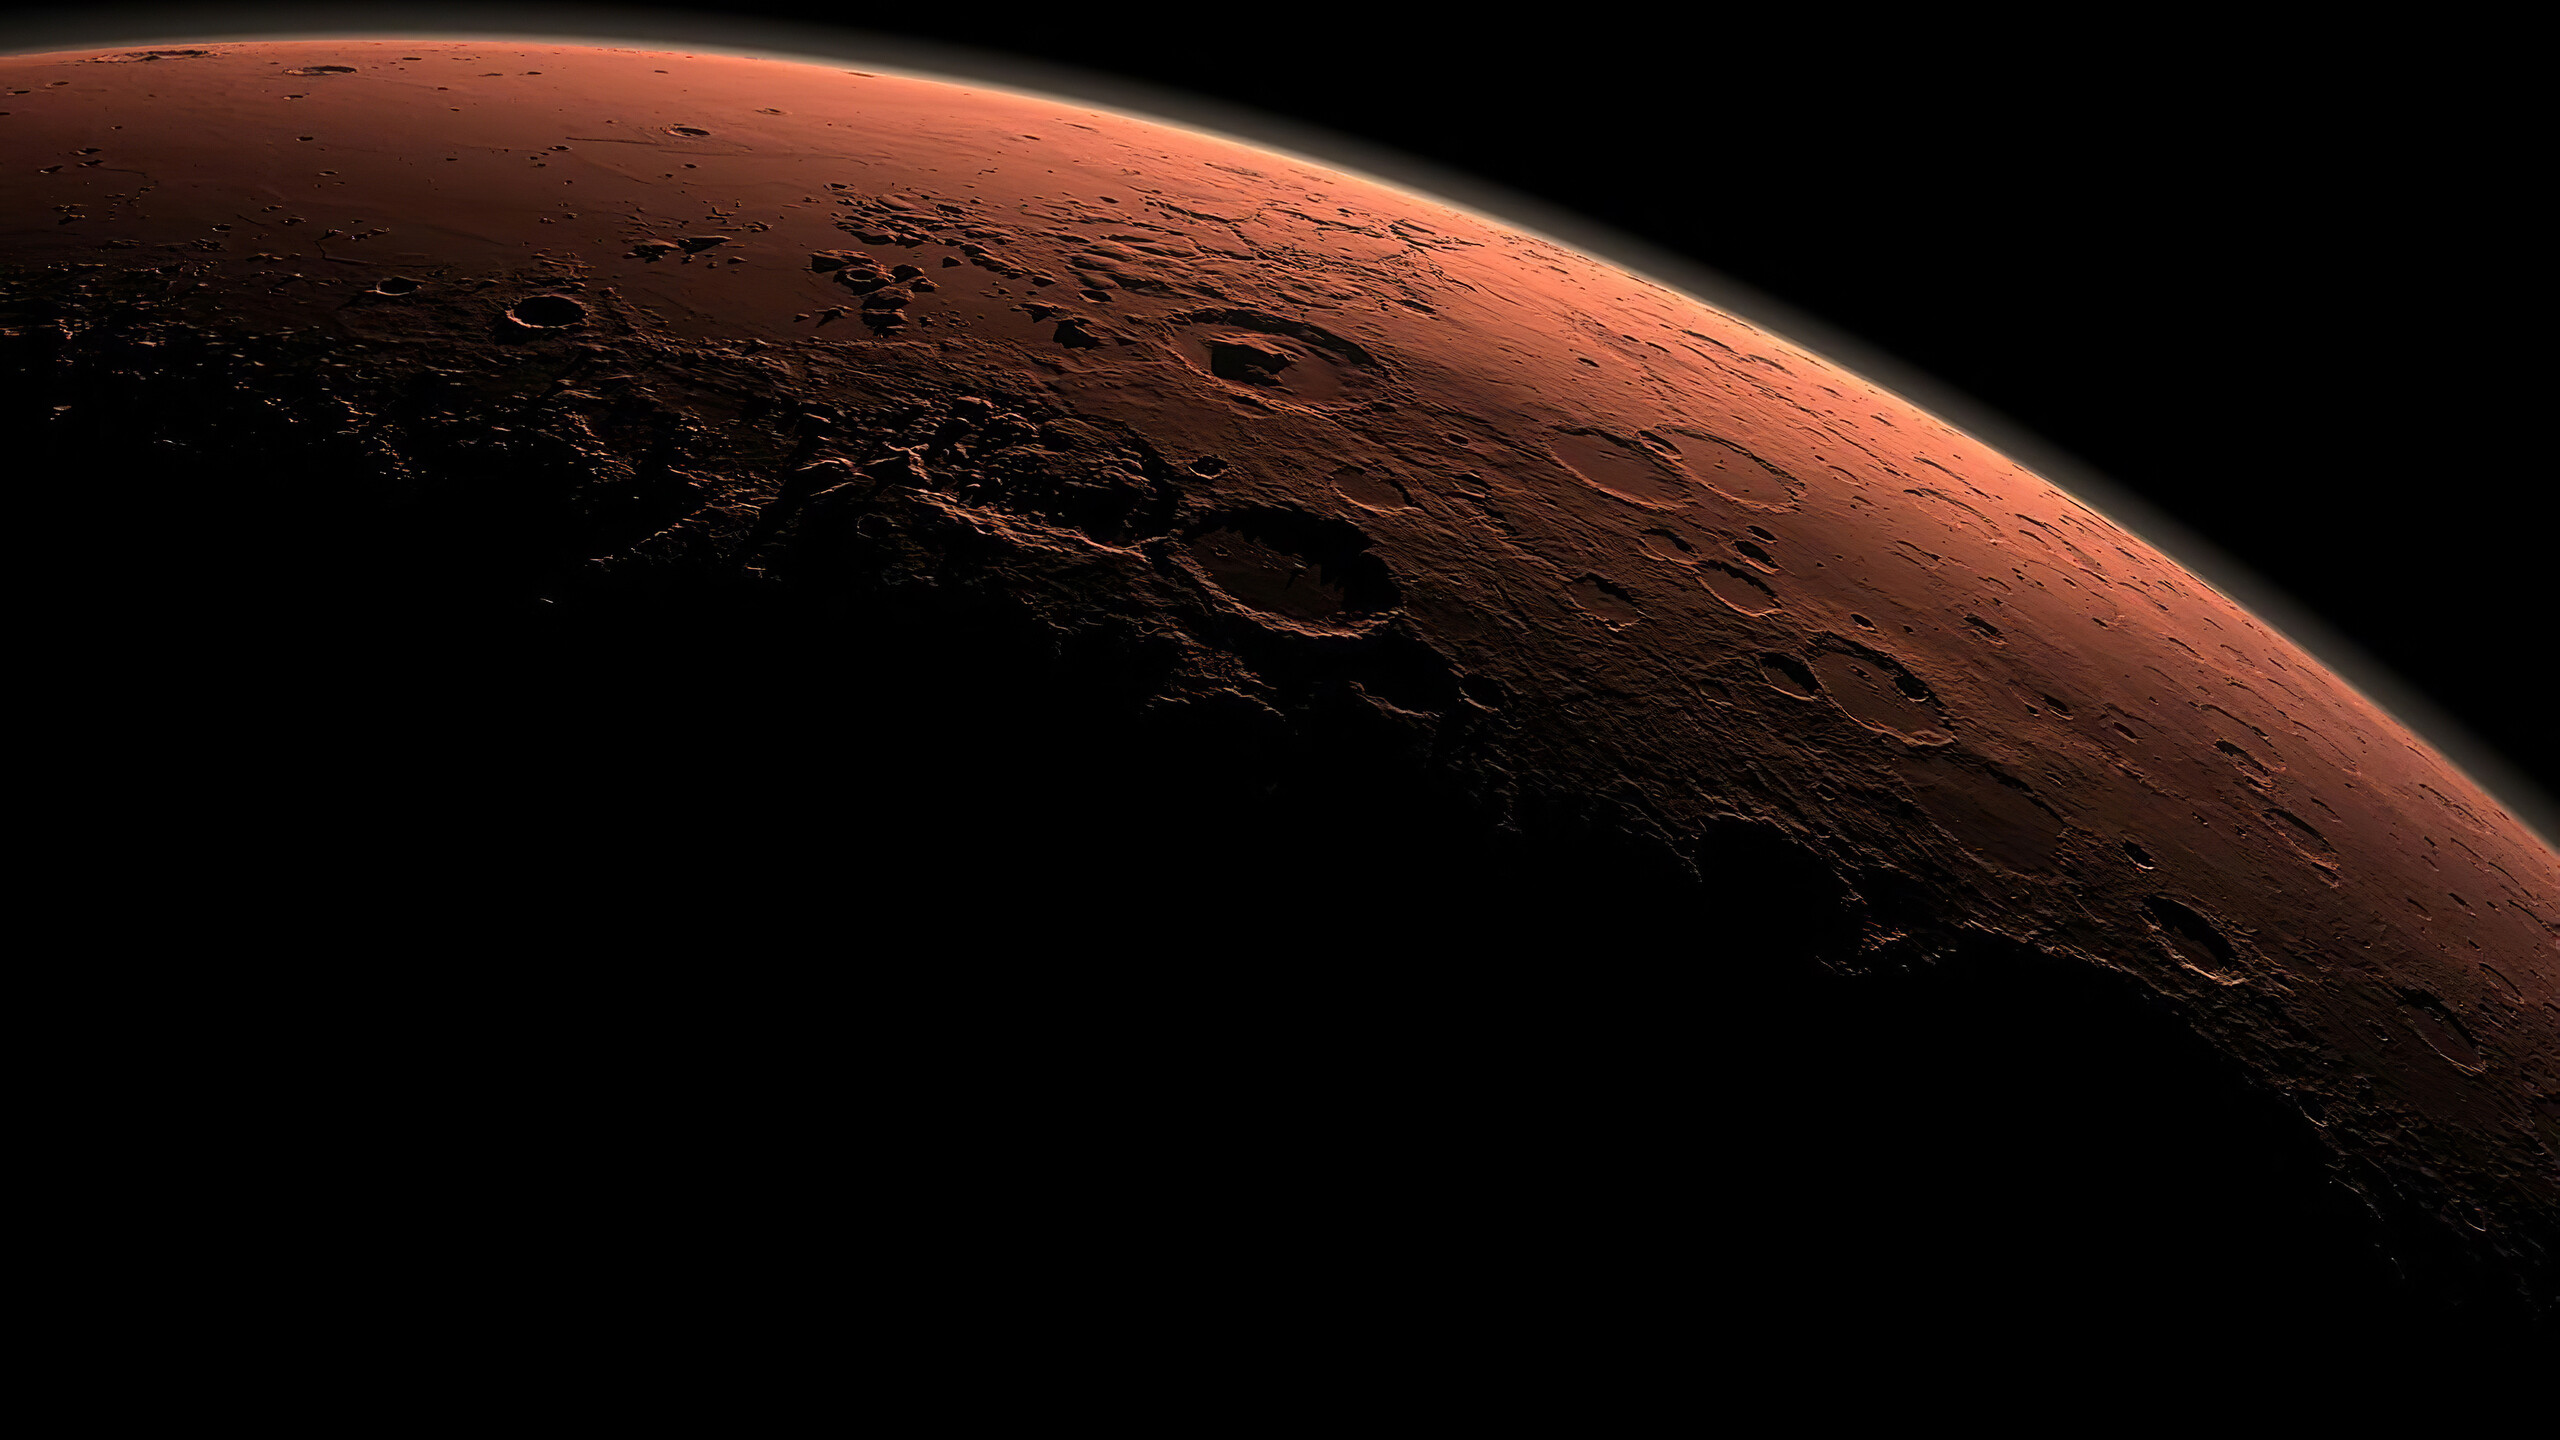 Mars: The second-smallest planet in our solar system. 2560x1440 HD Wallpaper.